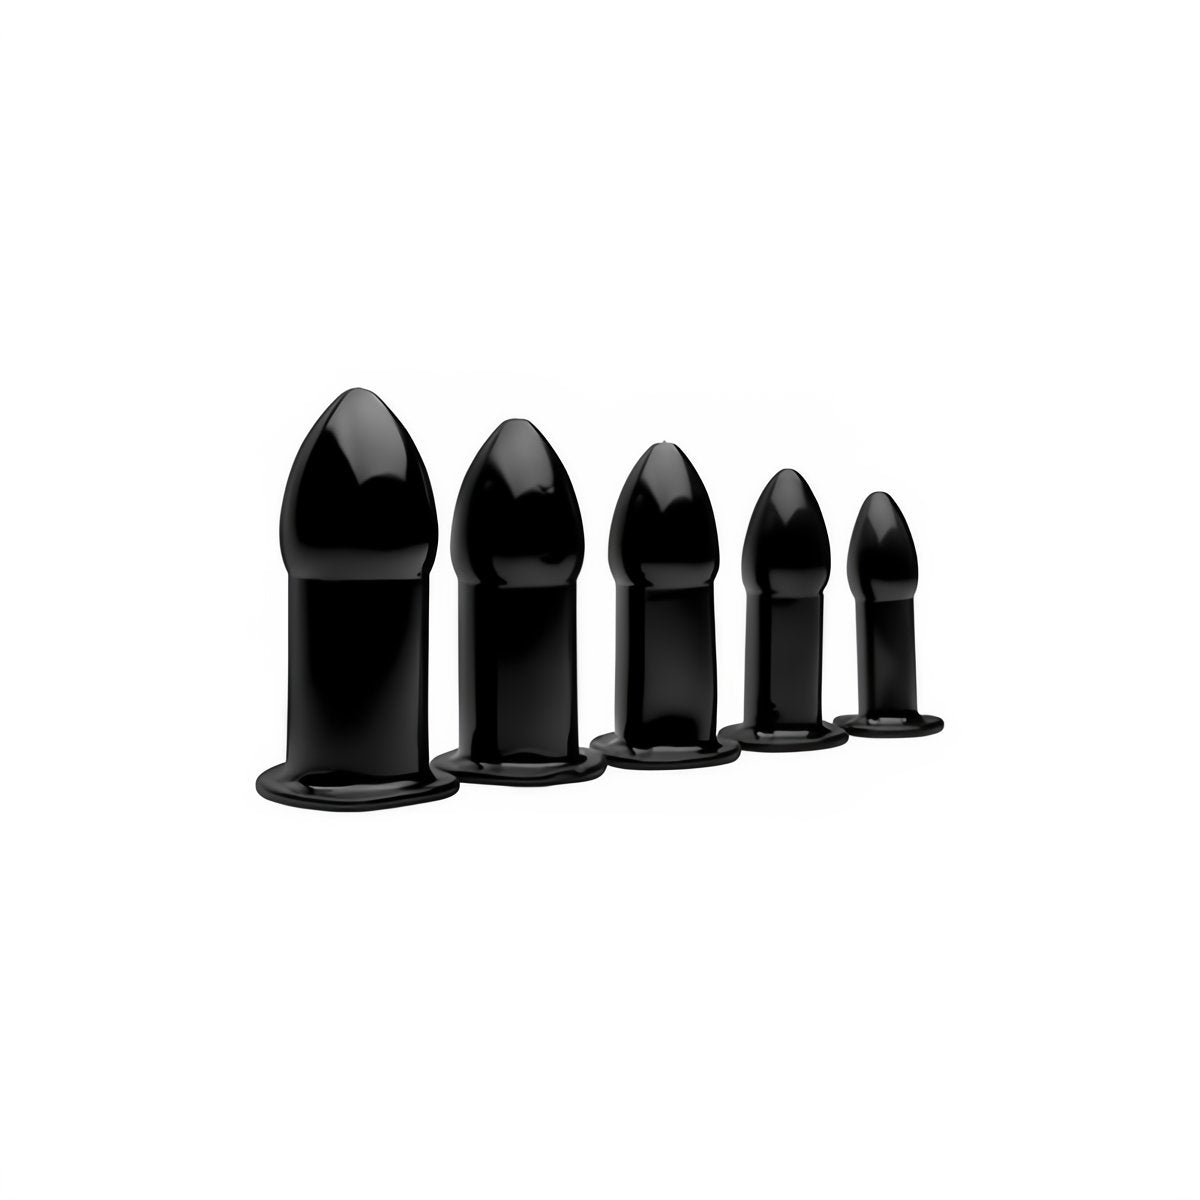 Expansion Anal Dilator Set - EroticToyzProducten,Toys,Anaal Toys,Buttplugs Anale Dildo's,Buttplugs Anale Dildo's Niet Vibrerend,Sexuele Training,Dilatatorsets,,GeslachtsneutraalXR Brands